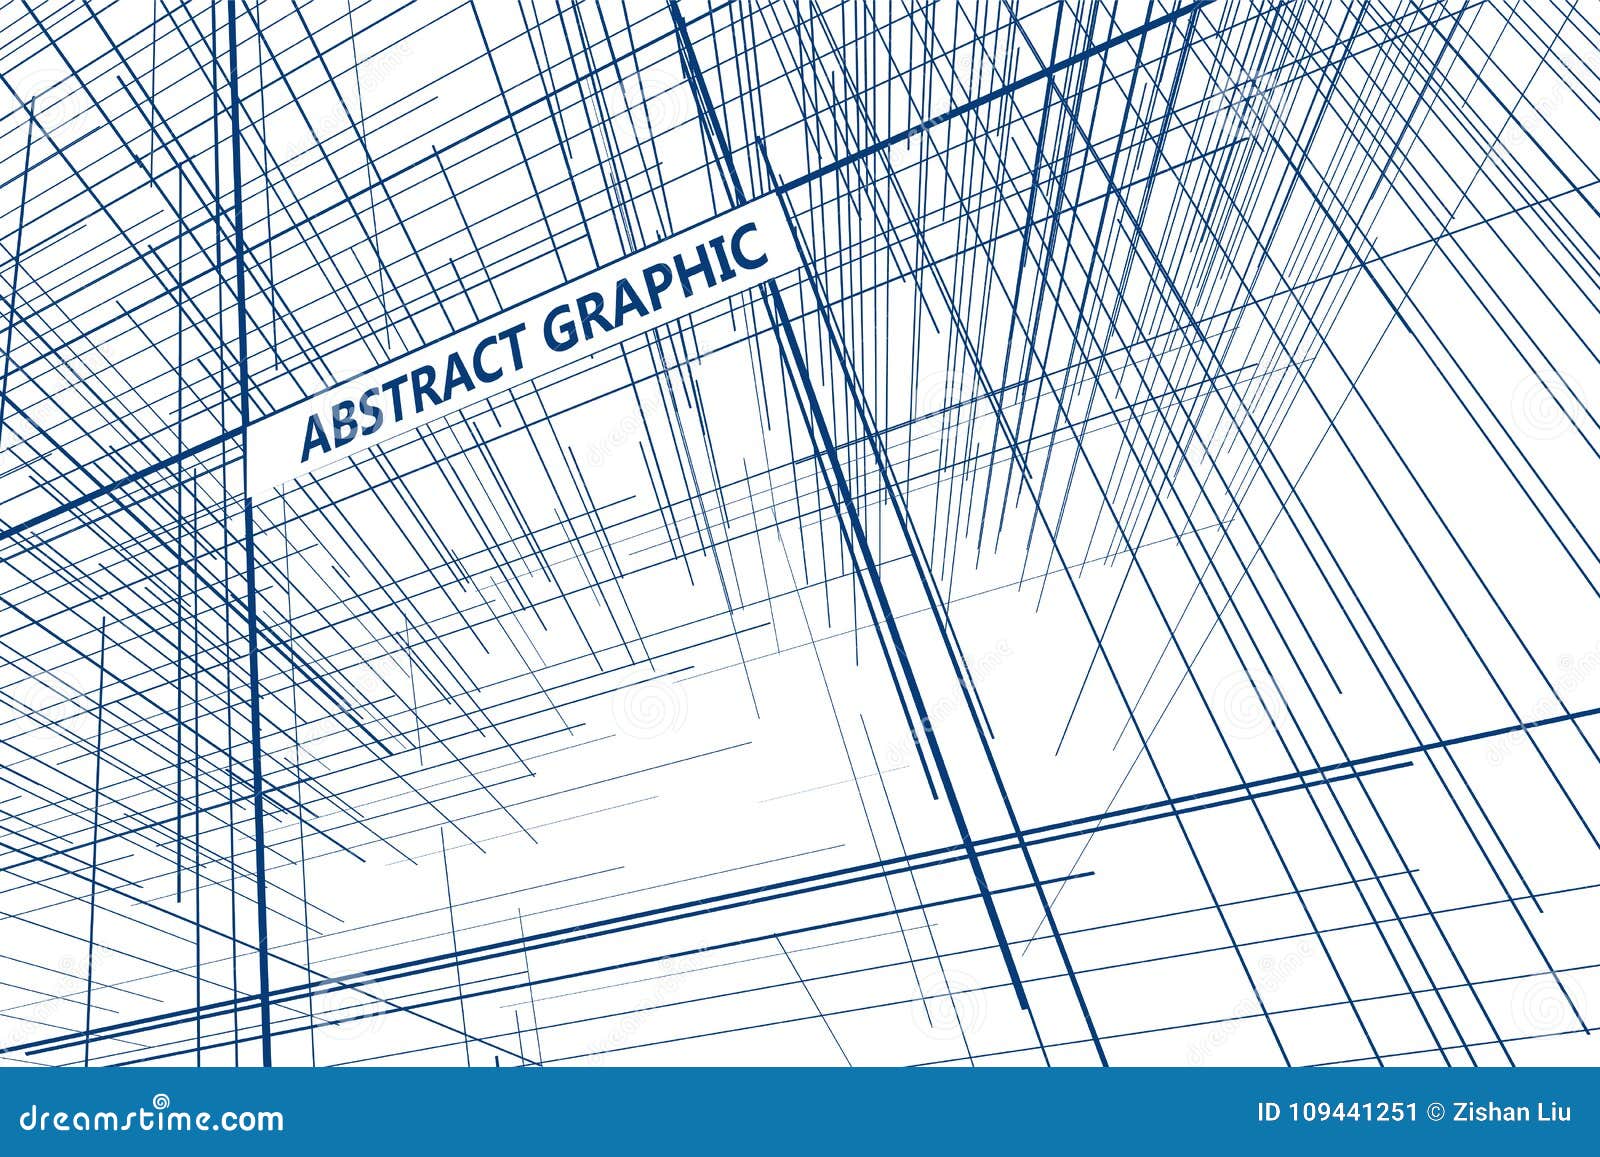 perspective of the lines composed of abstract graphic .